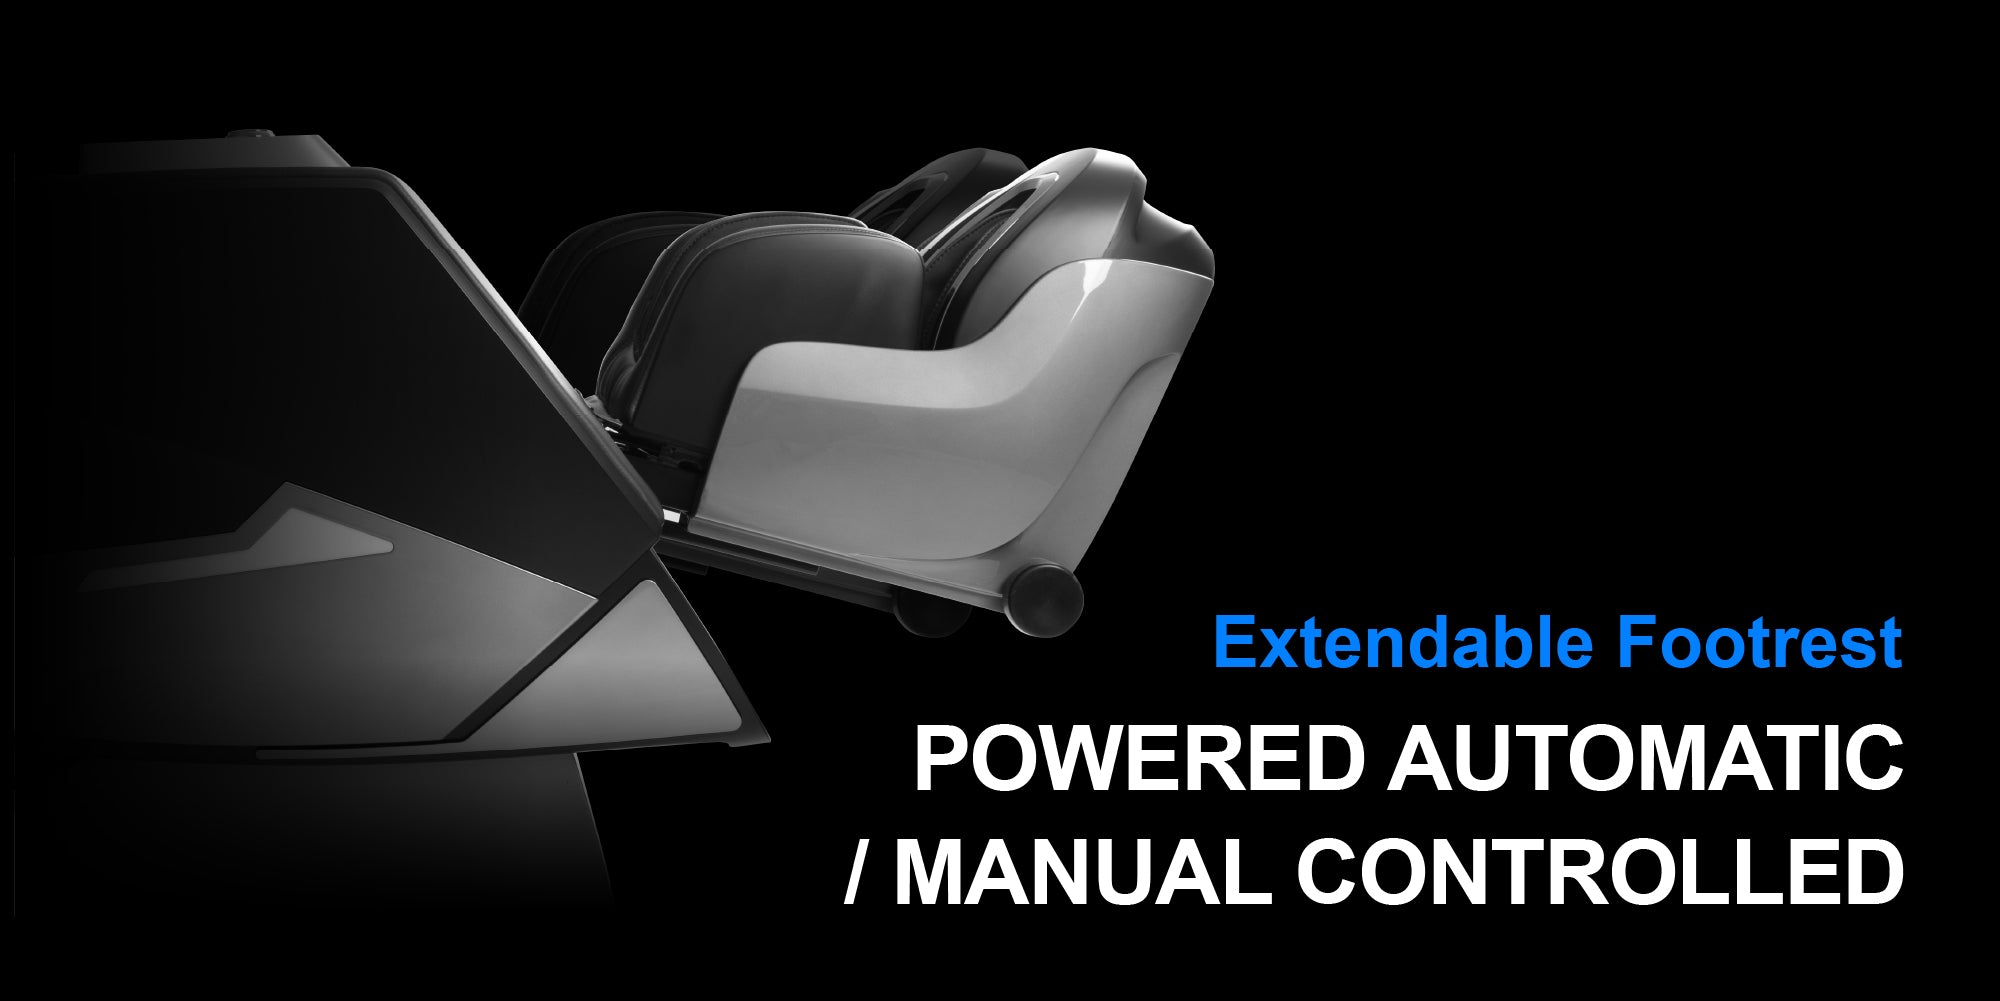 Extendable Footrest - Powered Automatic / Manual controlled